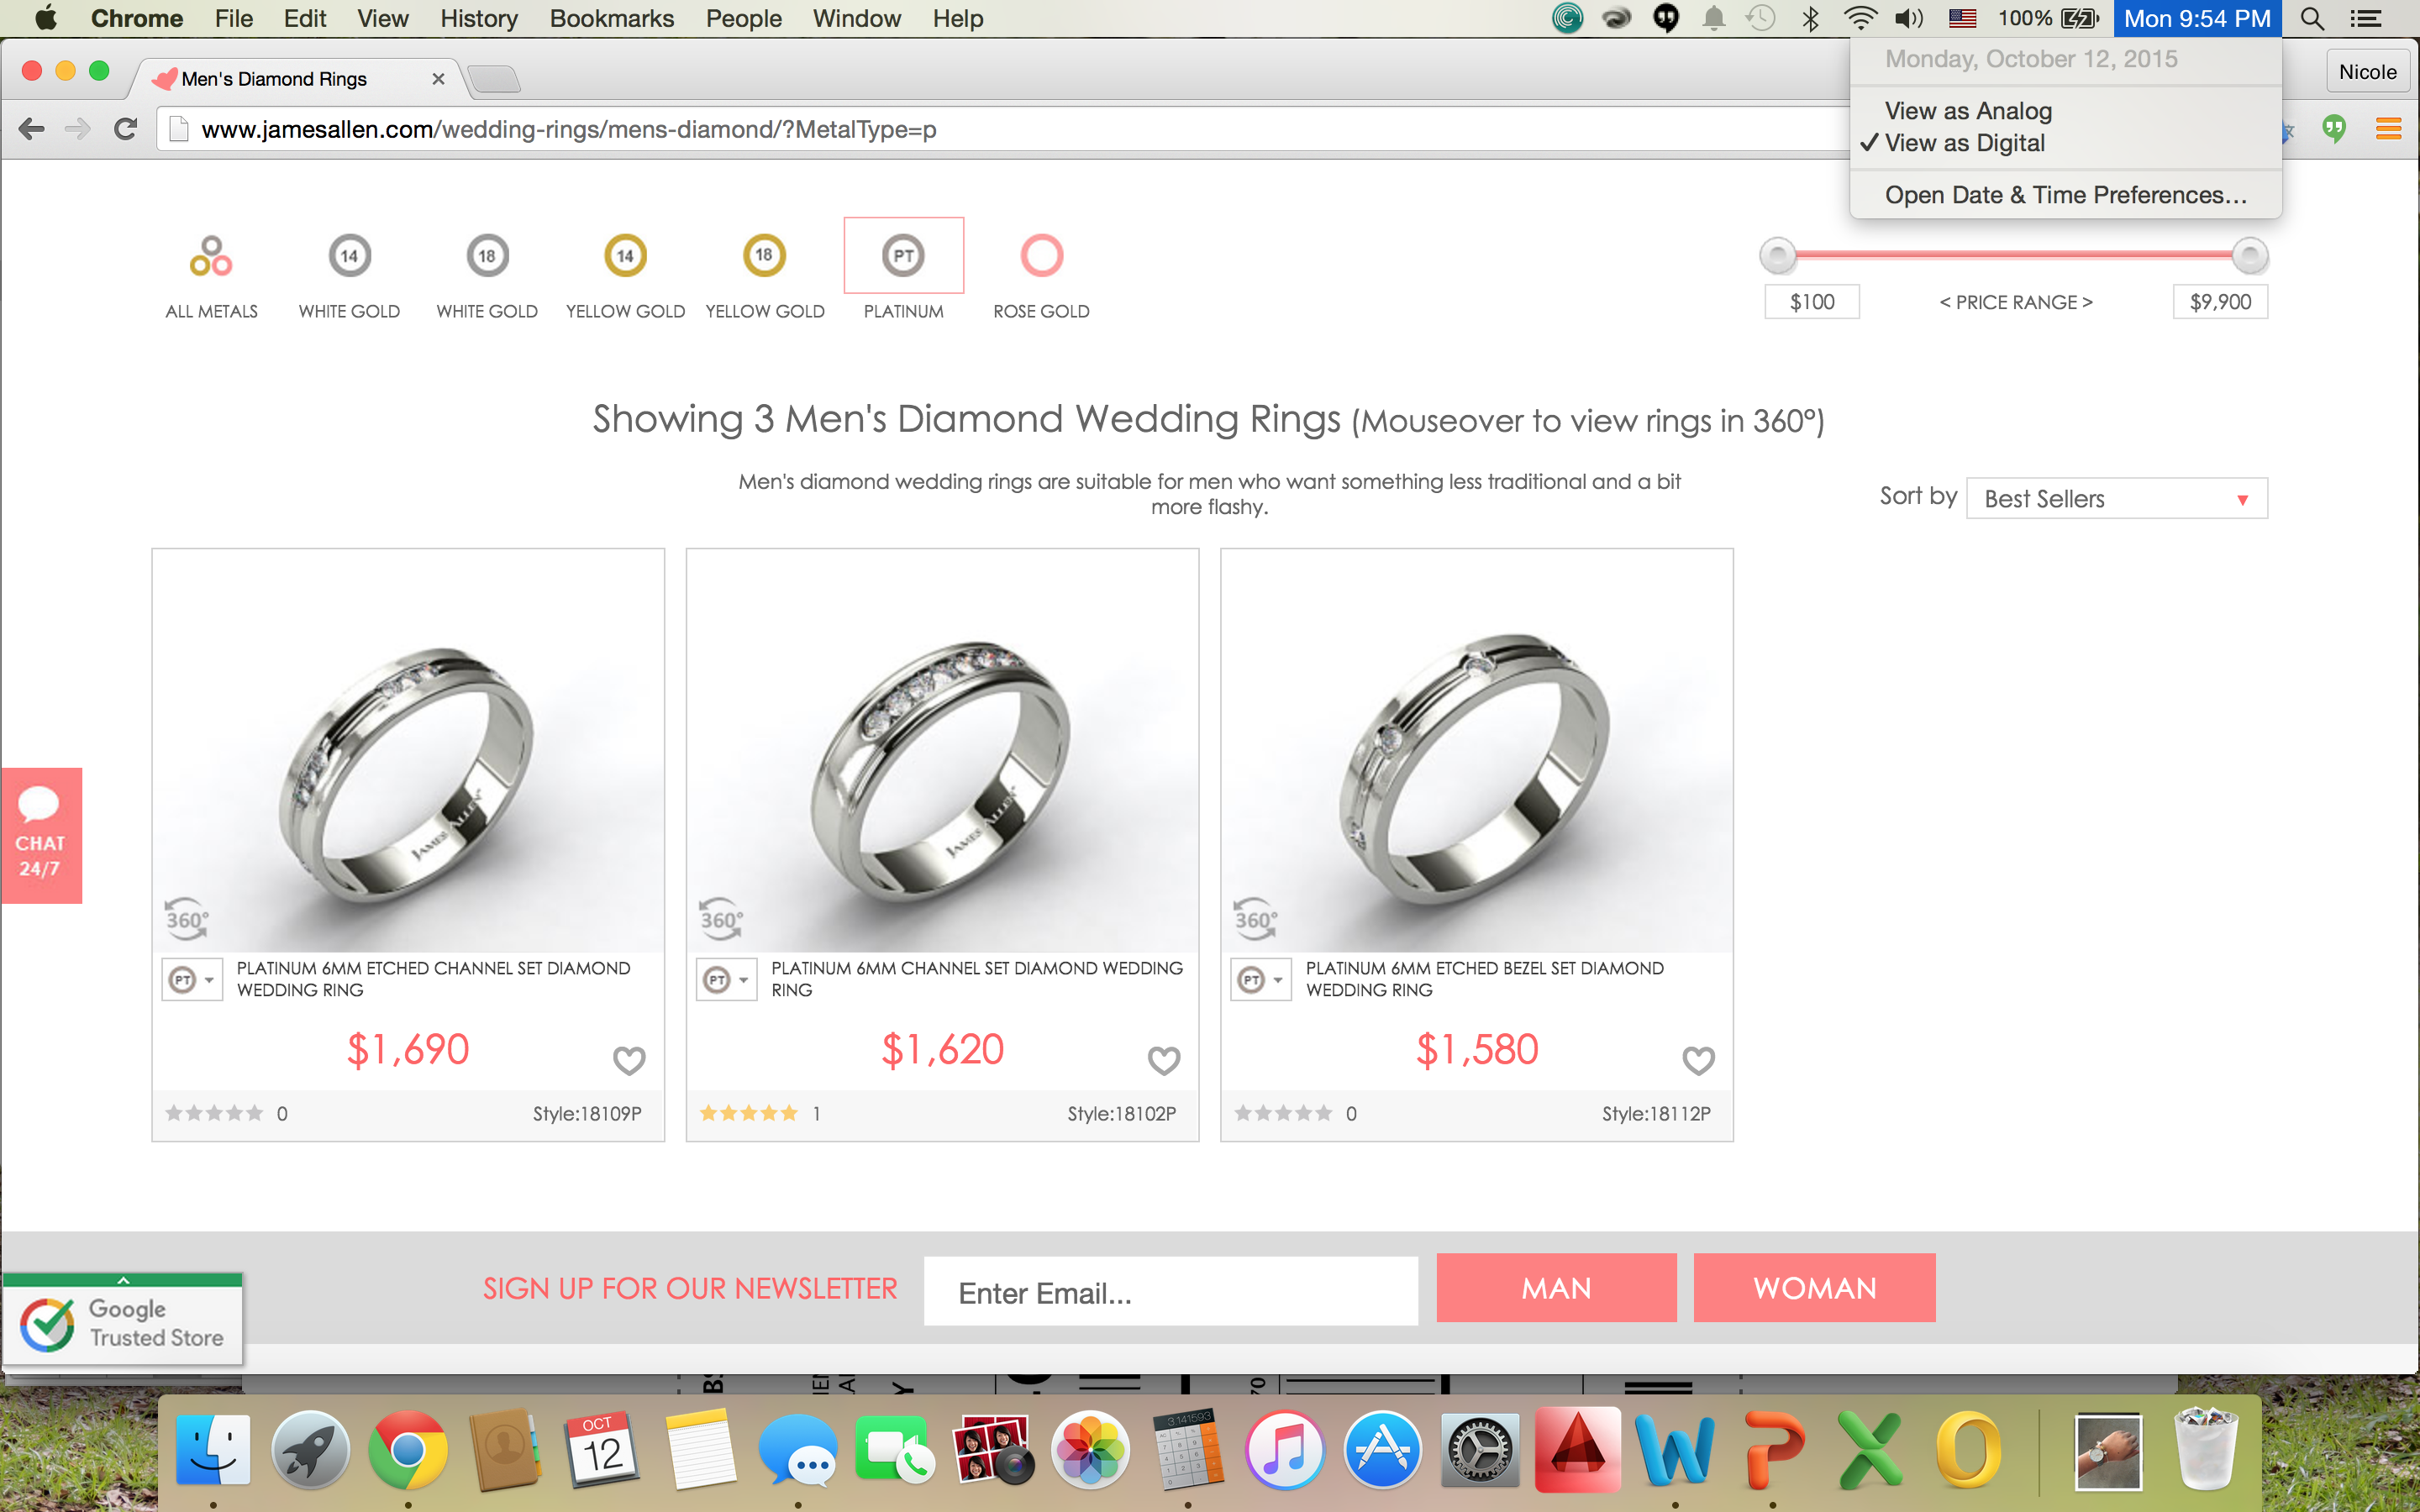 The other 3 rings in the same category (platinum with diamonds) listed in $1600 range